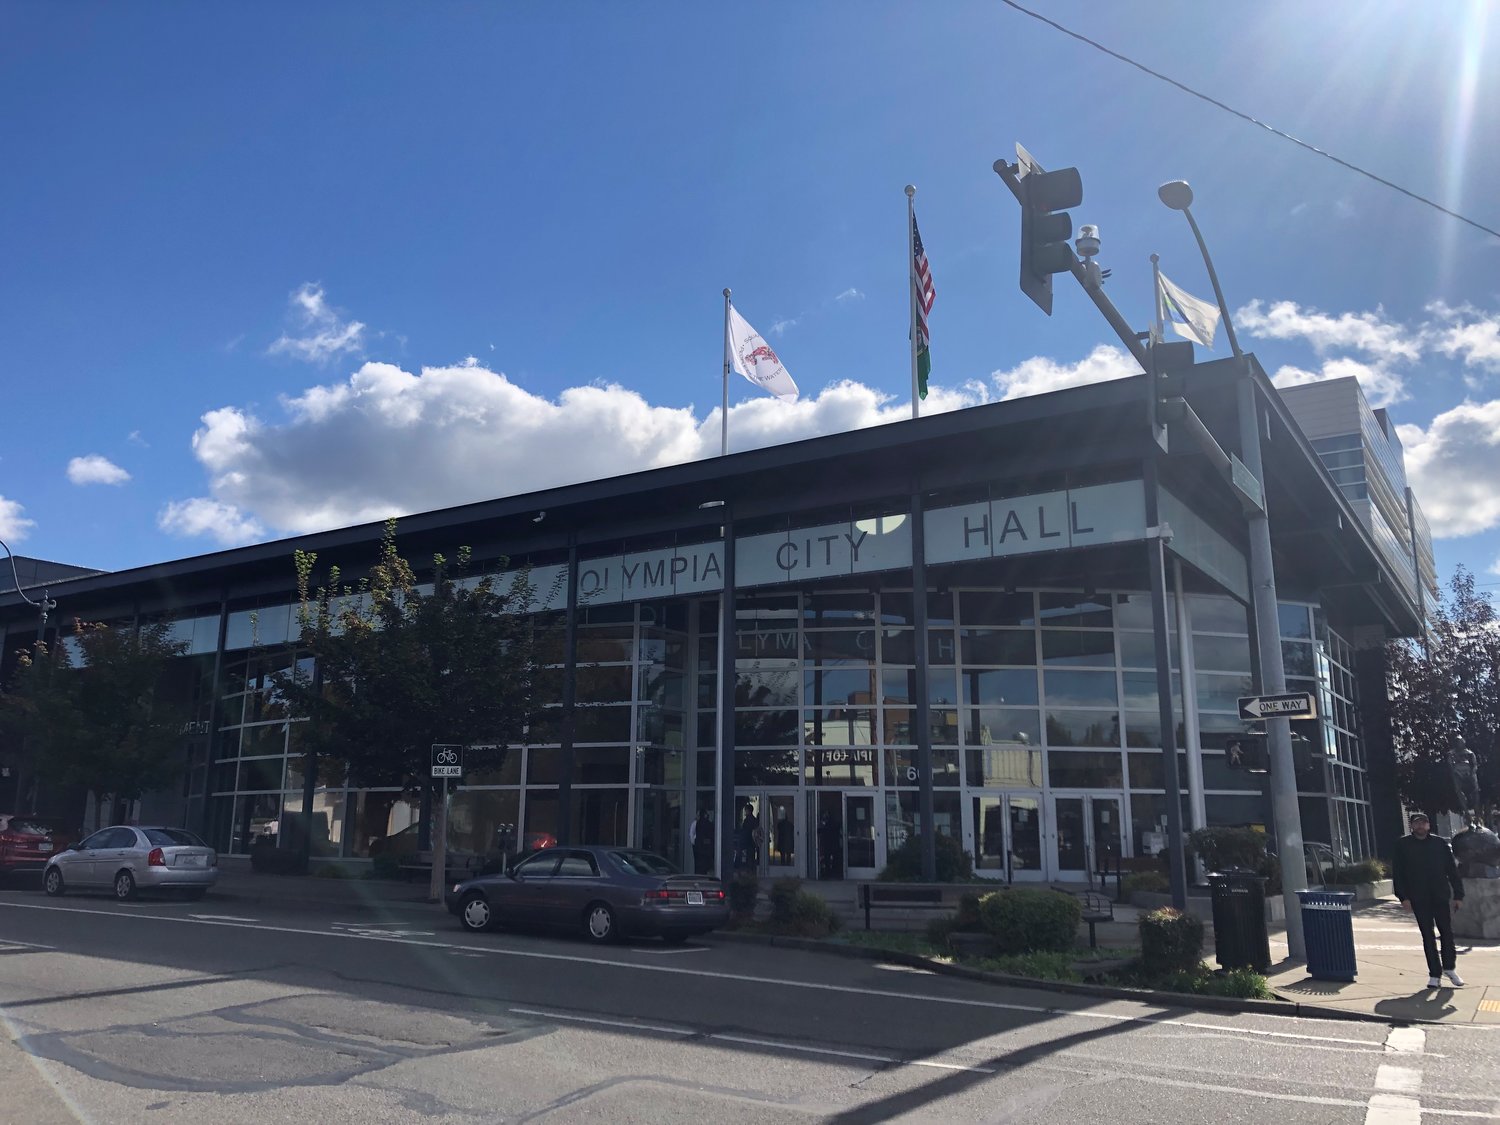 The Squaxin Island Tribe's flag flies on the left pole, the U.S. and Washington flags on the center pole and the City of Olympia flag flies on the right pole following a ceremony on Oct. 7, 2021 at Olympia City Hall.